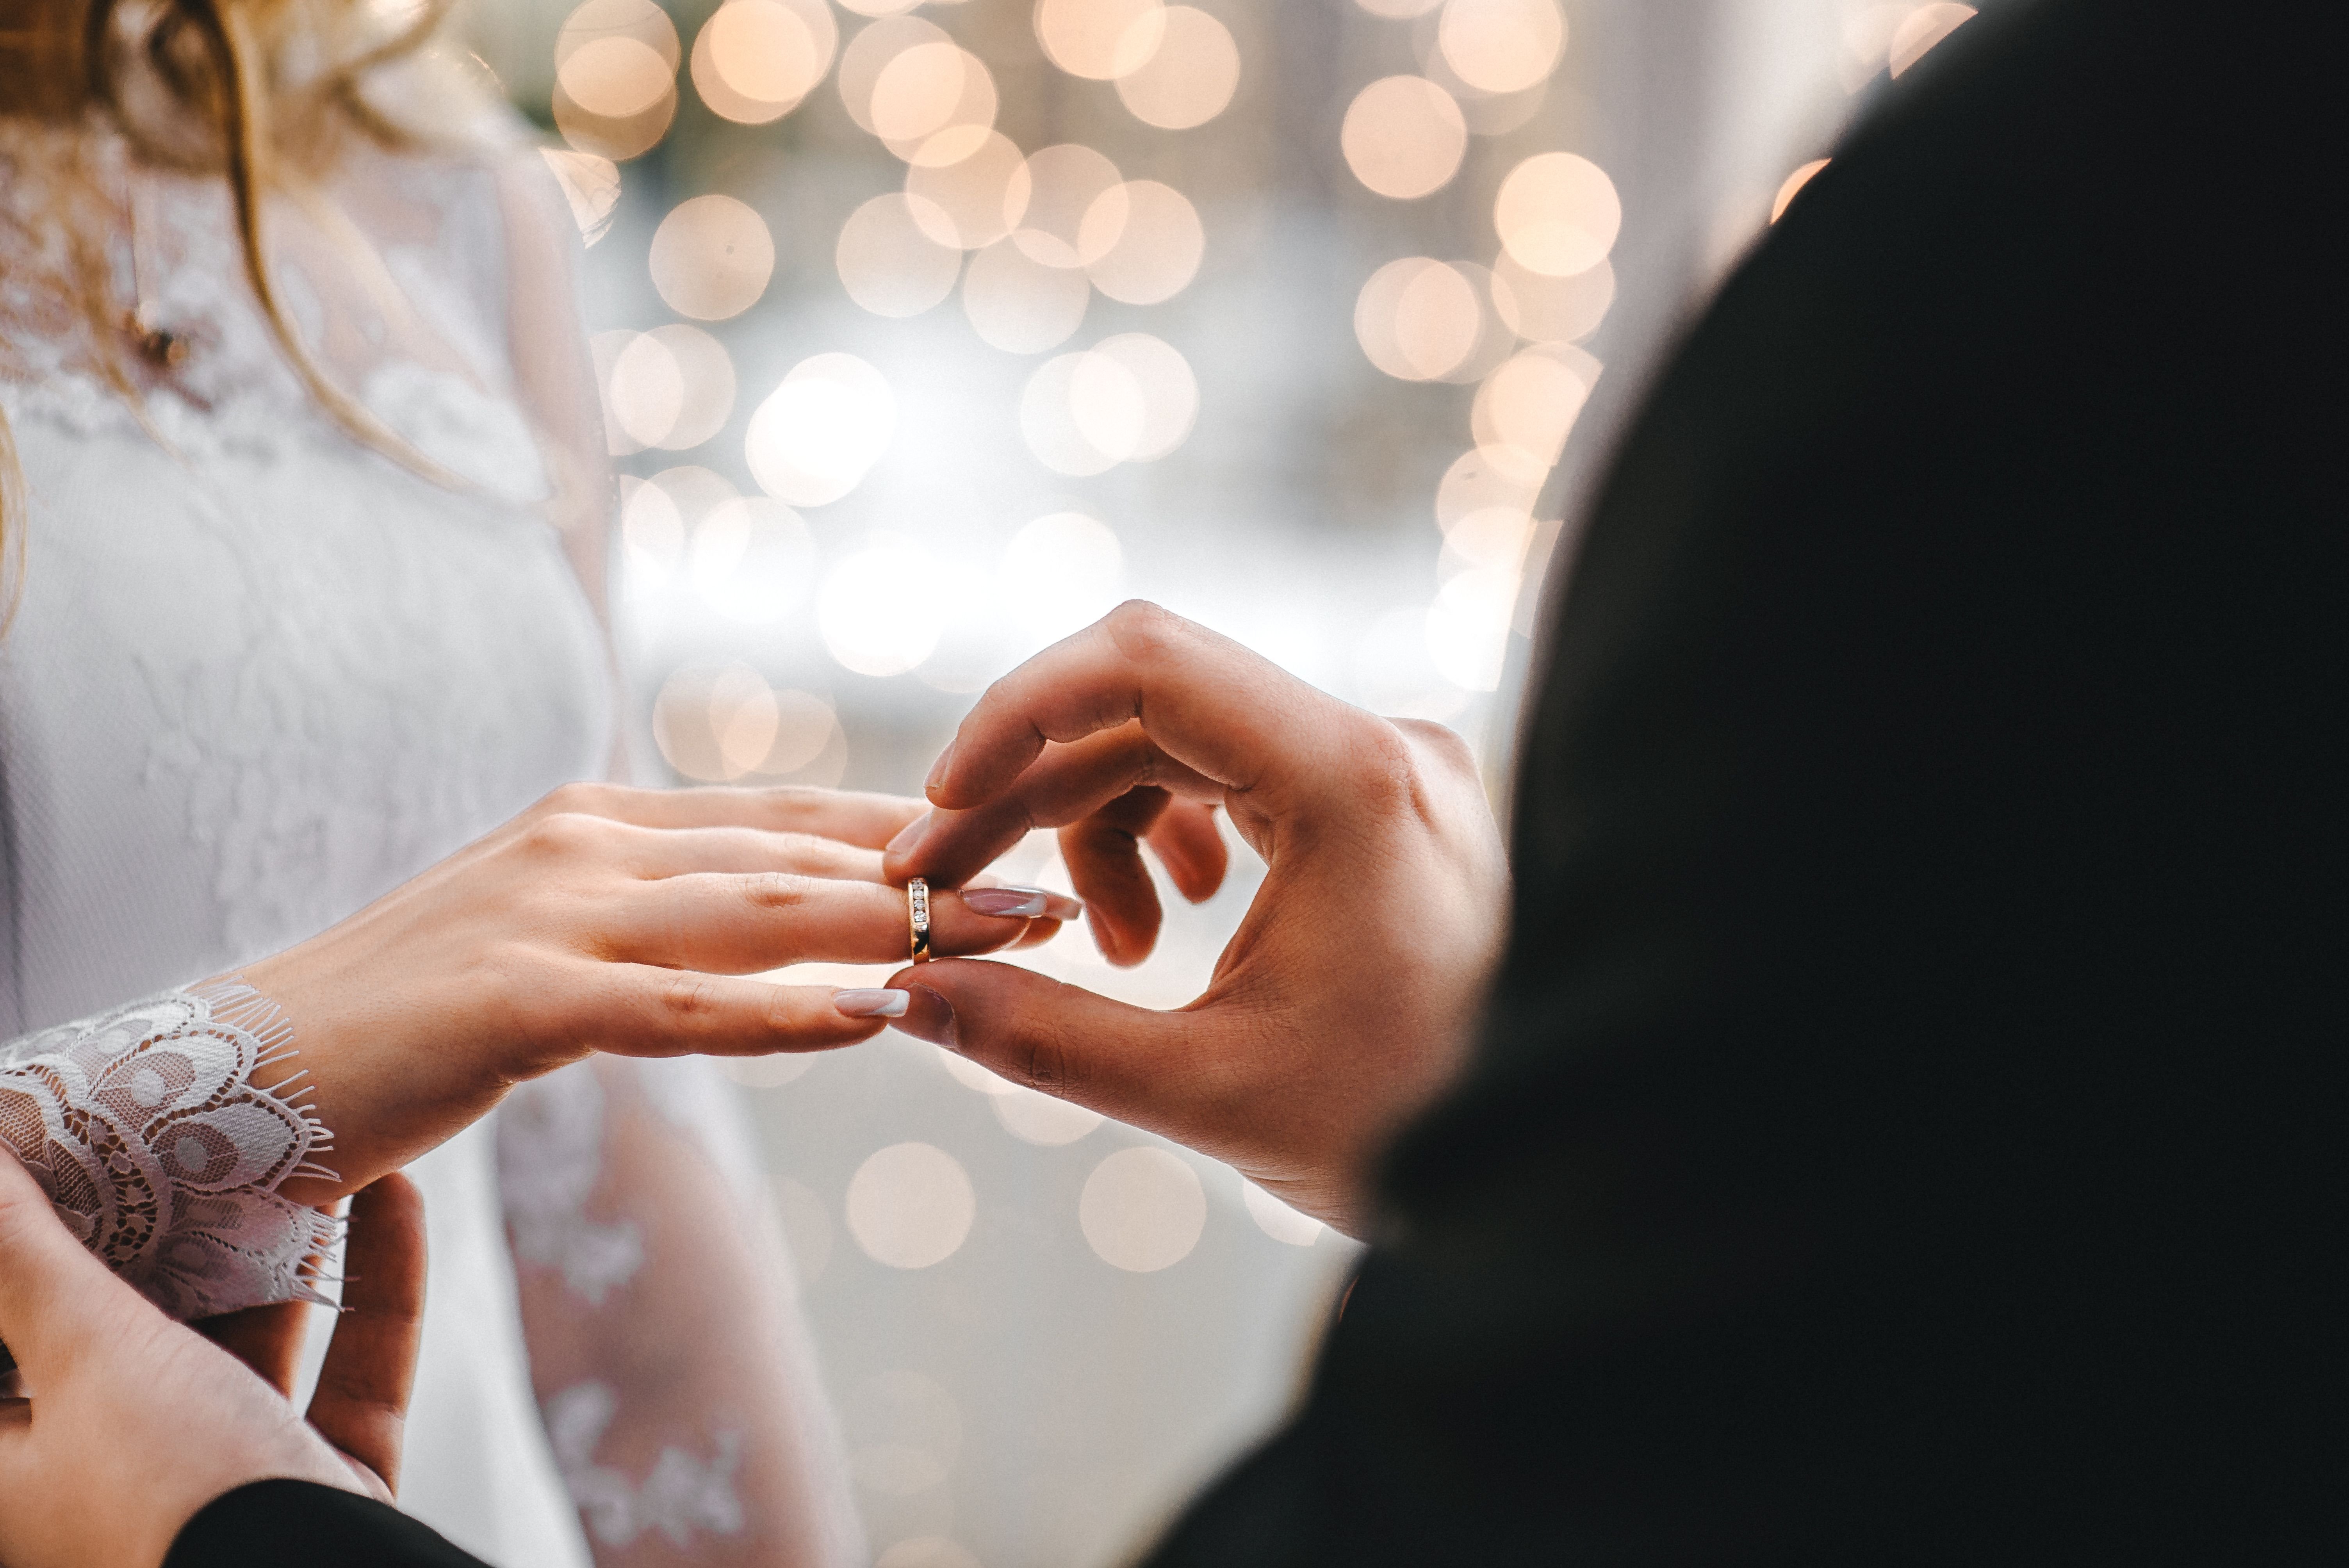 A groom puts the wedding ring on his bride. | Source: Shutterstock